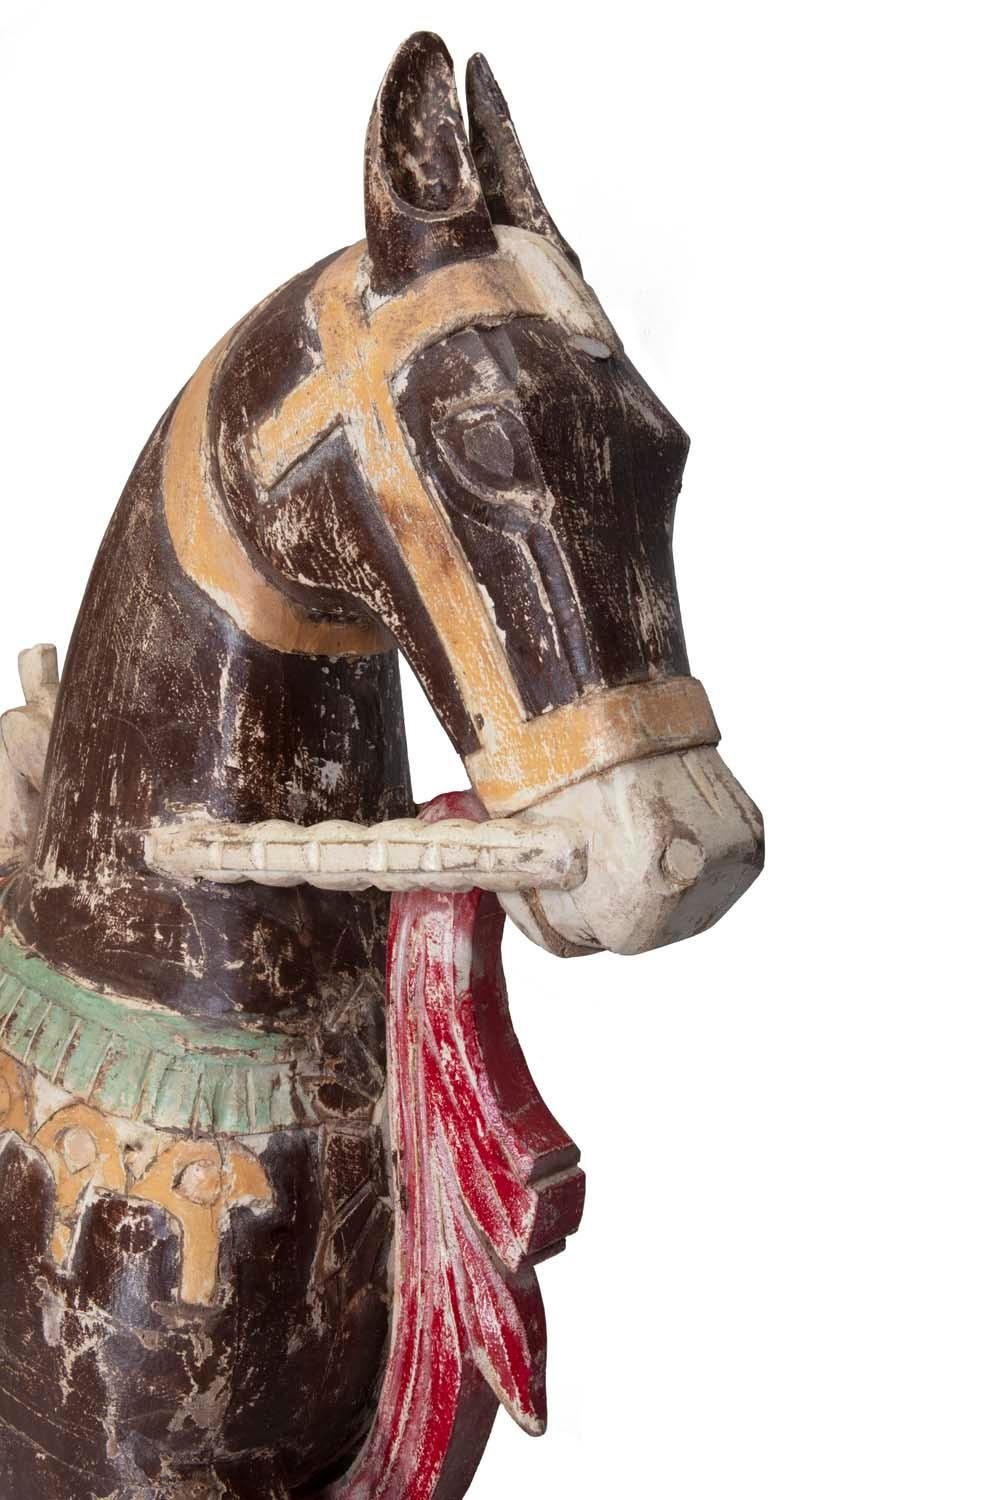 Four Foot Tall Antique Hand-Painted Wooden Horse with Bird Saddle from India In Fair Condition For Sale In Asheville, NC